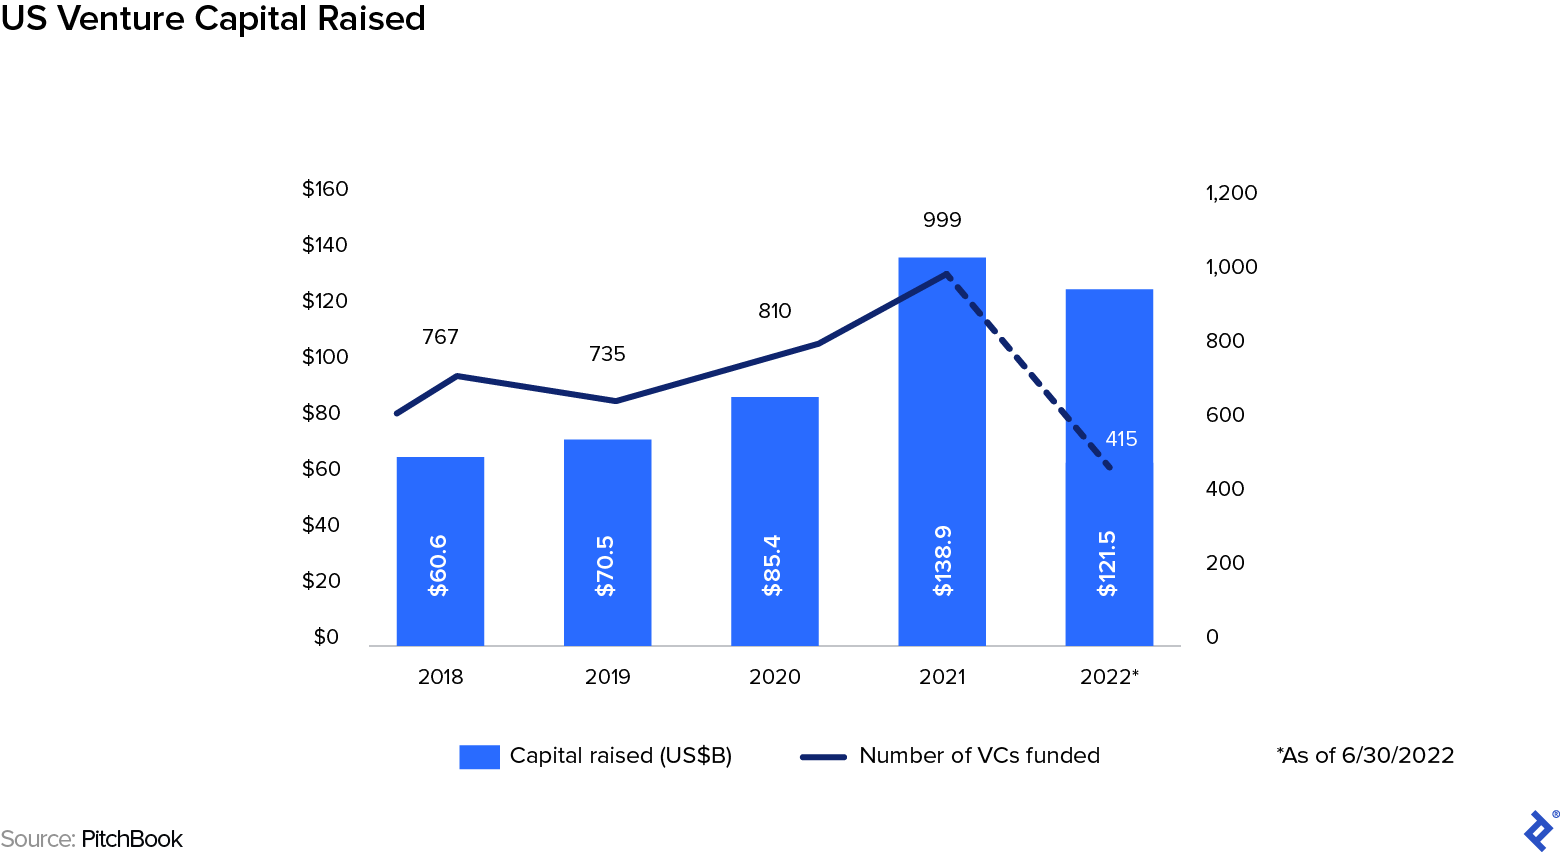 This chart compares the capital raised per year by VCs (represented as a bar graph) against the number of VCs who have been funded (represented as a line graph) from 2018 to June 30, 2022, the most recent data available. With minor fluctuations, the chart shows both series of data rising steadily until 2020 and then sharply to a high point in 2021. Even though the 2022 data only represents six months, the amount of capital raised has nearly caught up to the capital raised in all of 2021 and almost half as many VCs have been funded as were funded in 2021.